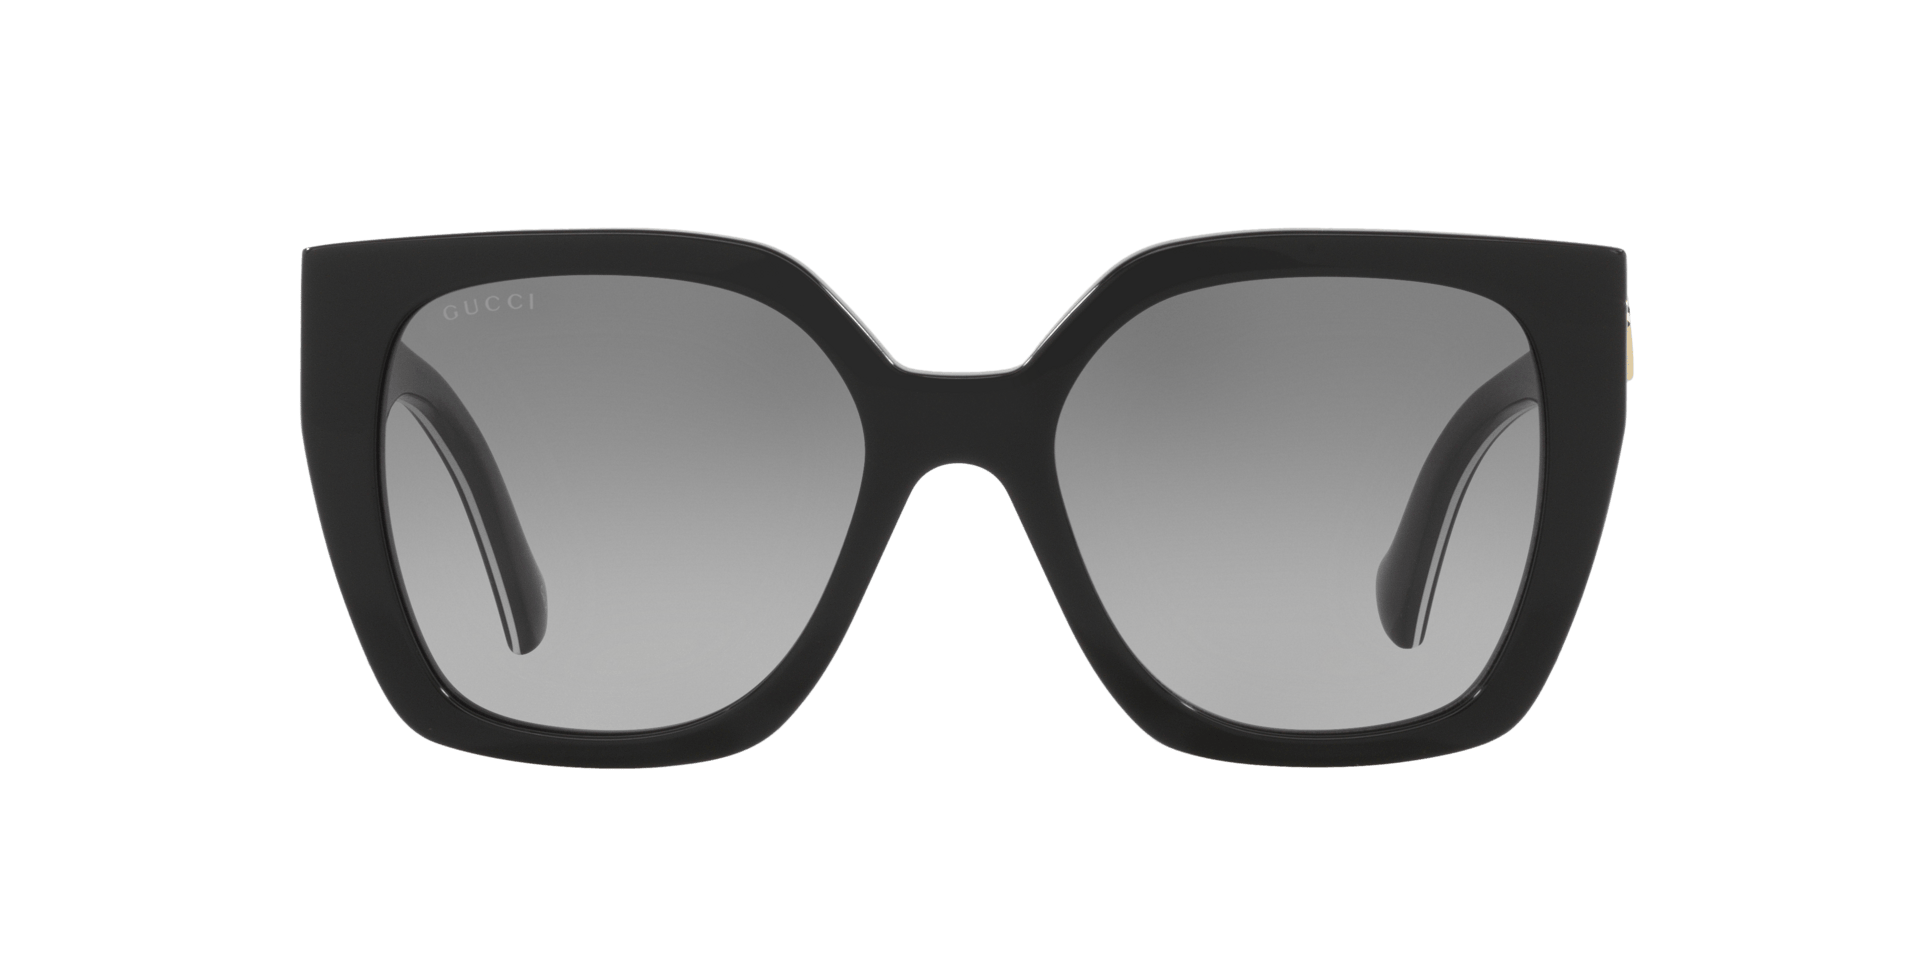 Where can I buy the new Gucci sunglasses online? - Quora